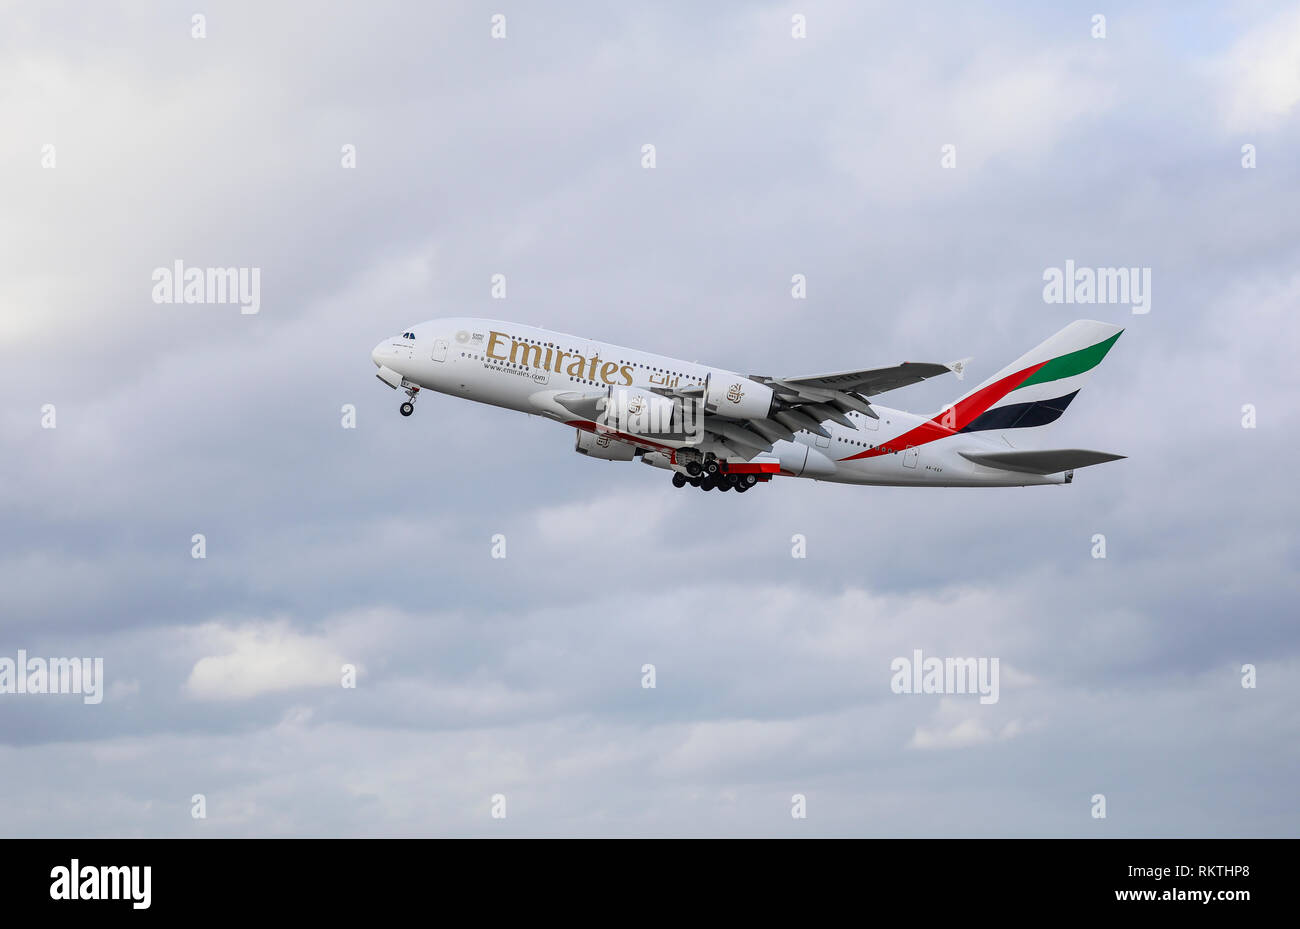 Duesseldorf, North Rhine-Westphalia, Germany - Emirates Airbus A380-800 aircraft takes off from Duesseldorf International Airport, DUS Duesseldorf, No Stock Photo